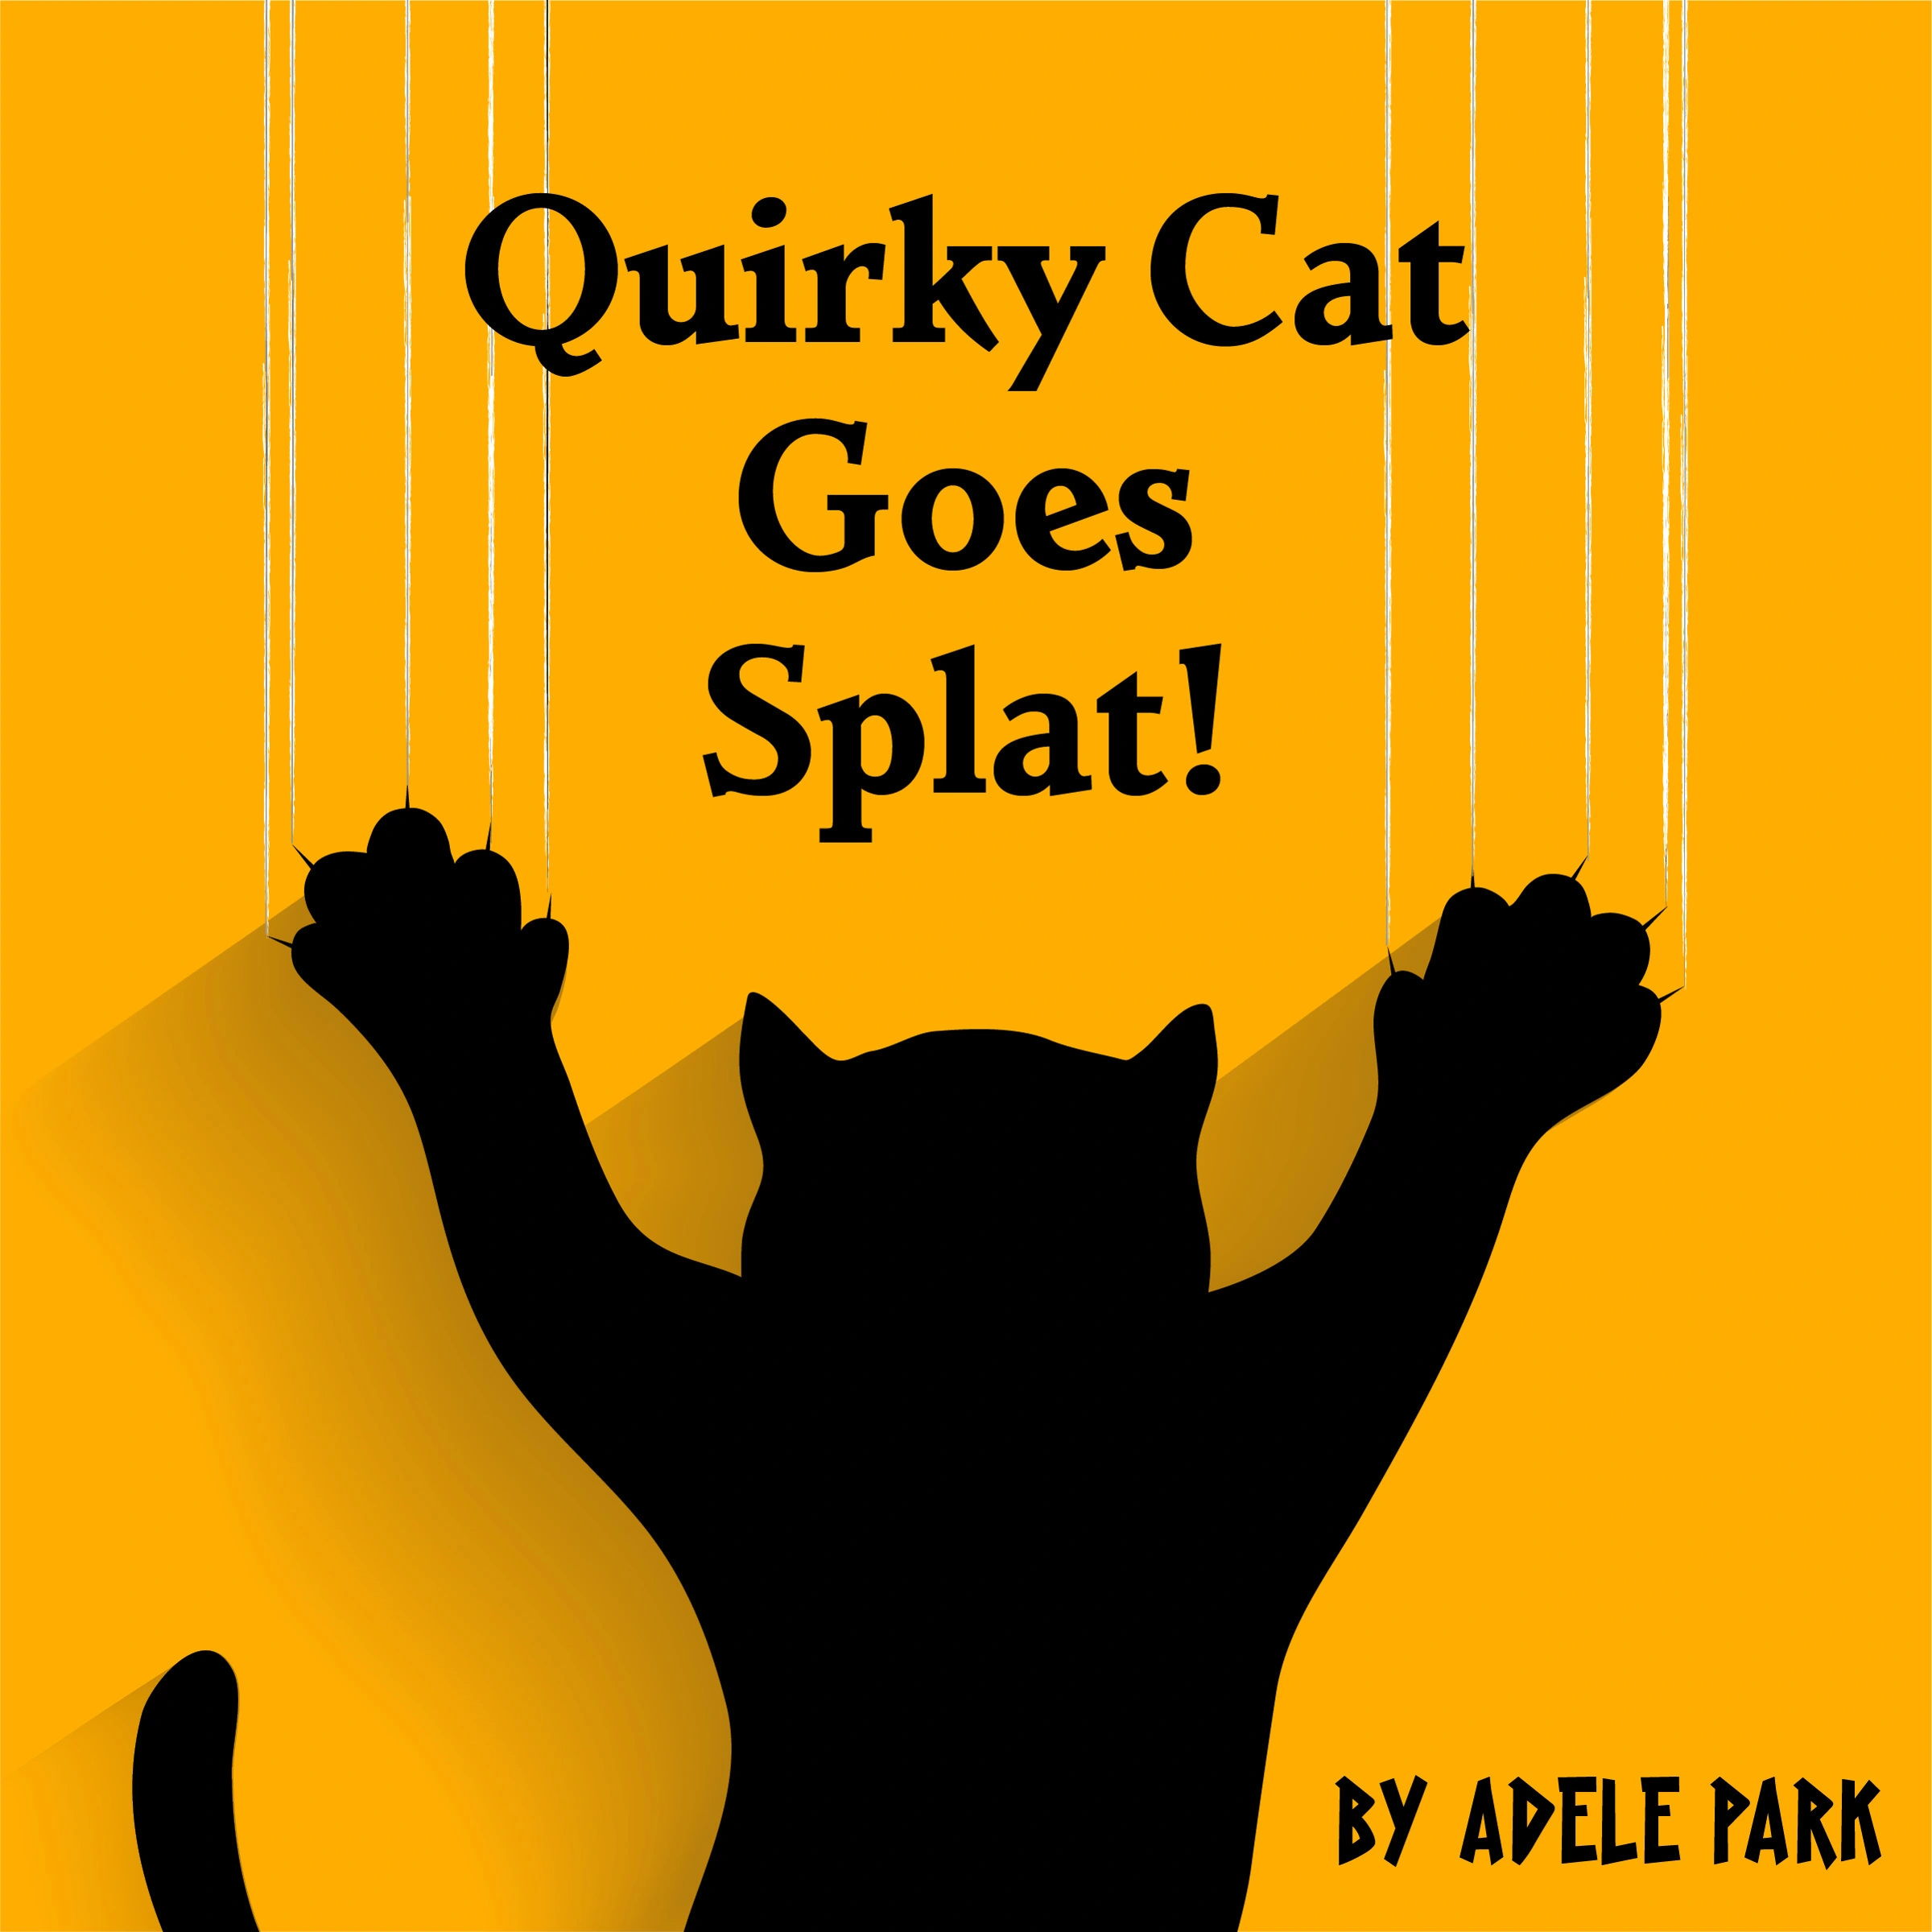 Quirky Cat Goes Splat! by Adele Park Audiobook